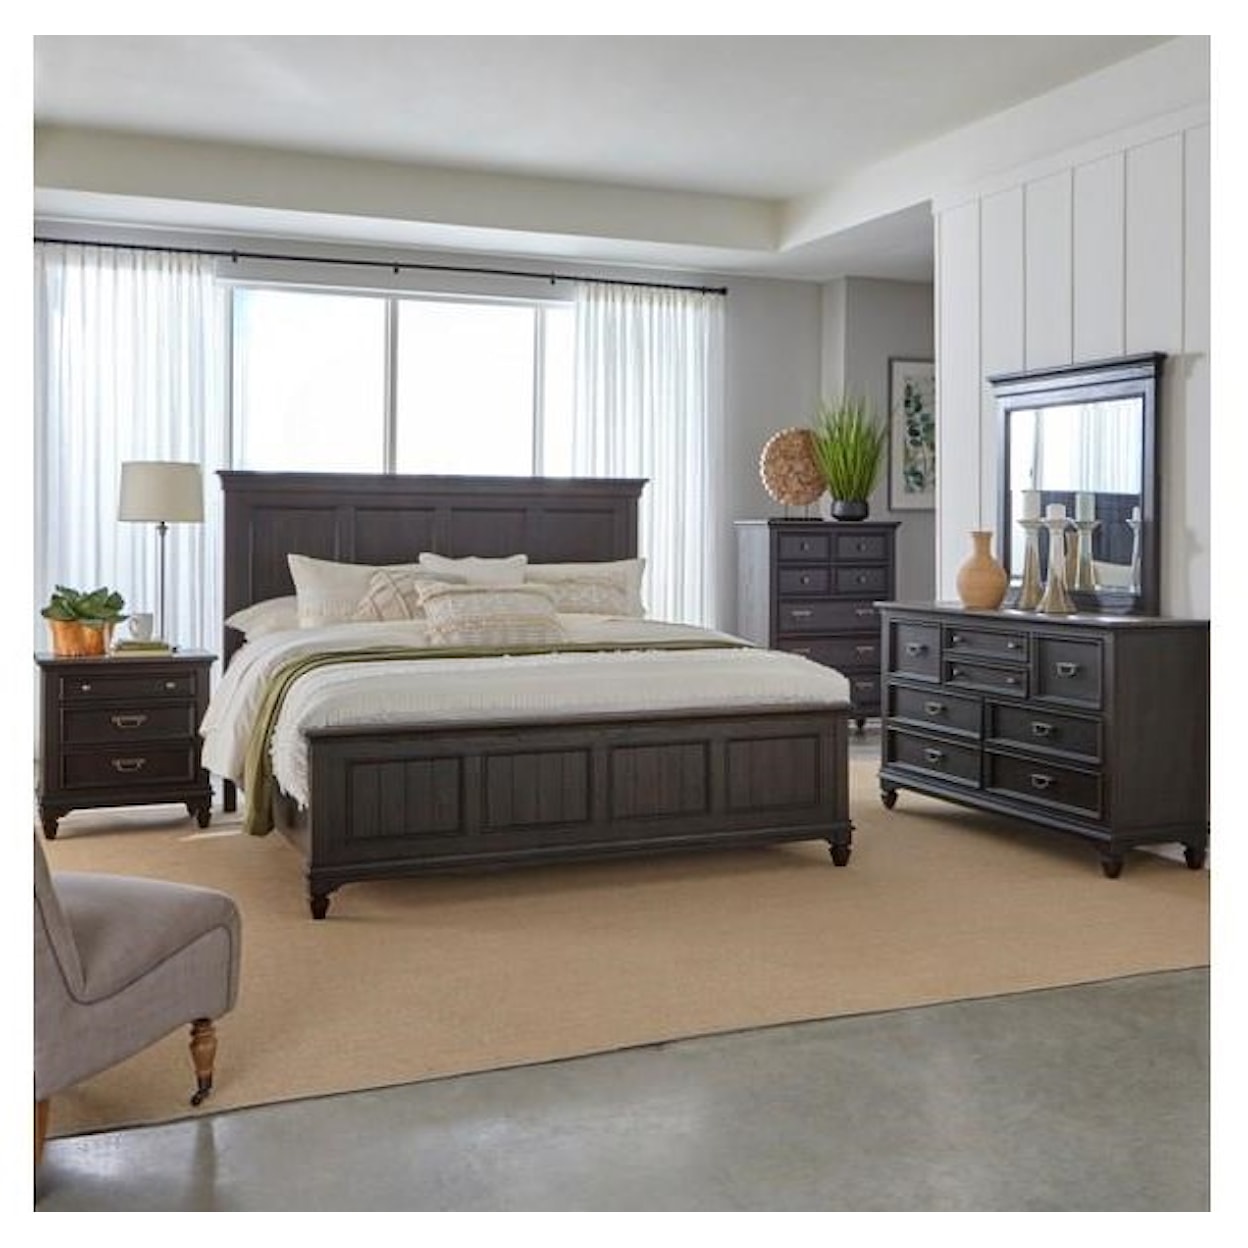 Liberty Furniture Allyson Park King Bedroom Group 